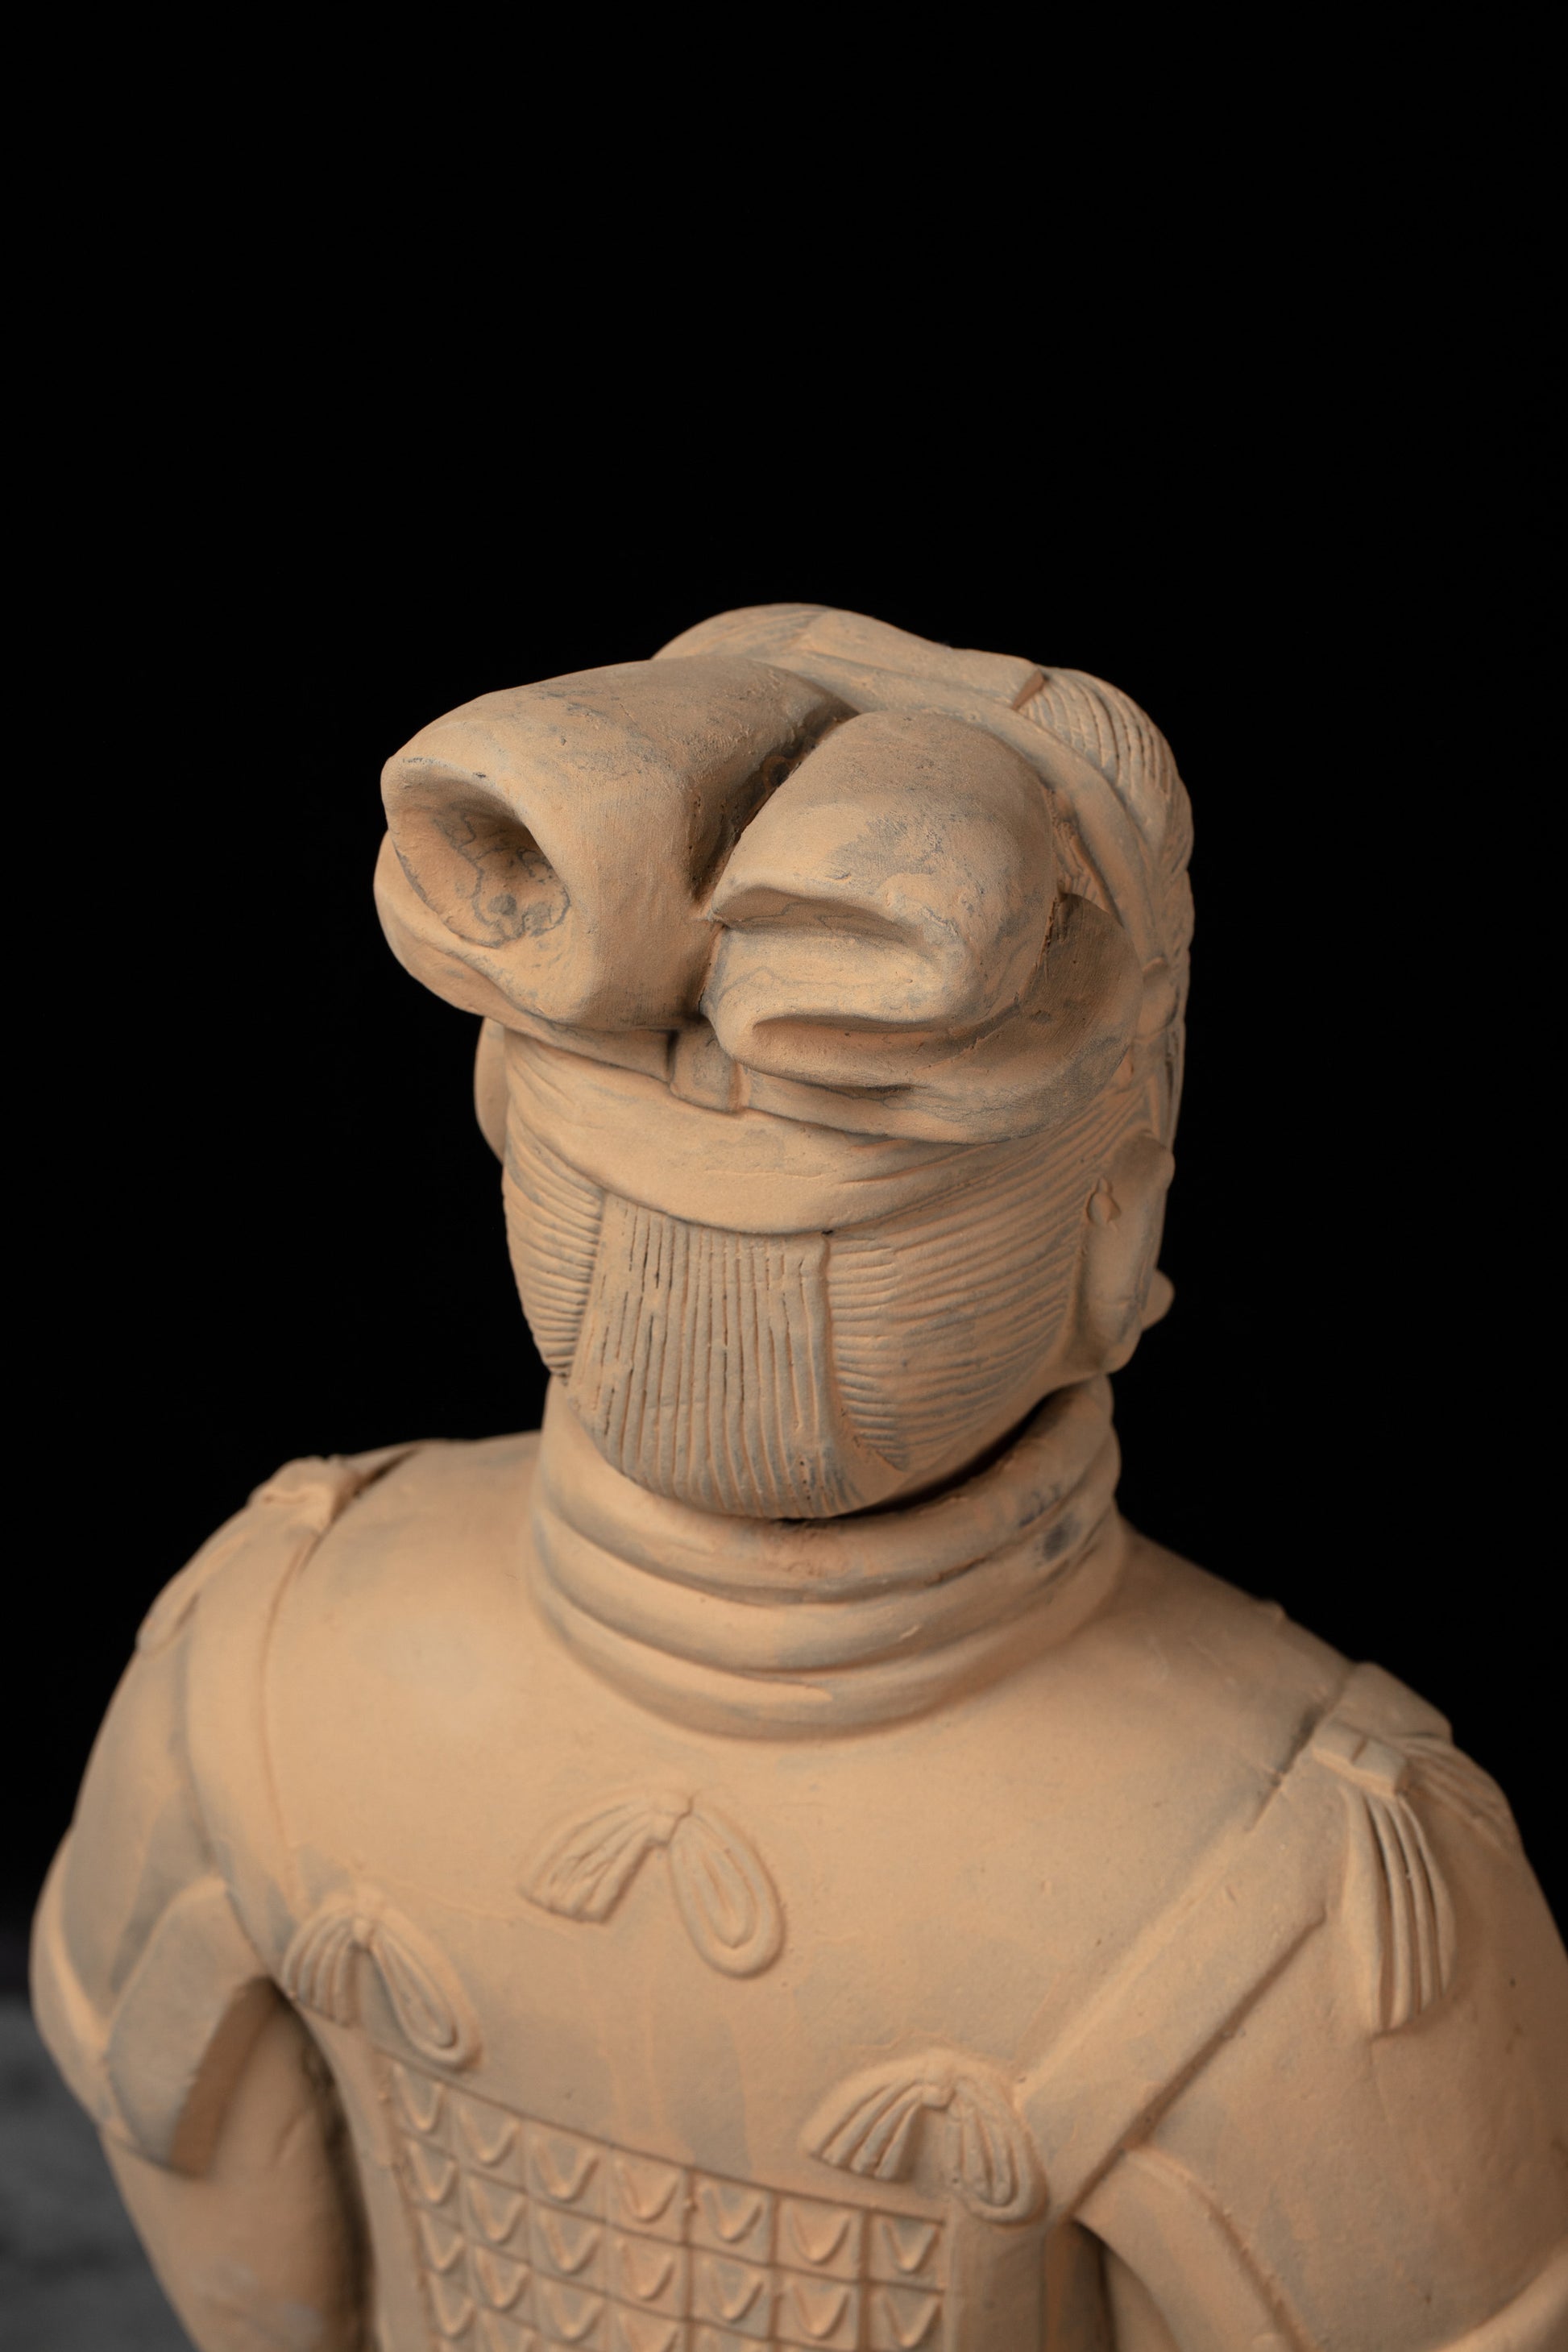 70CM General - CLAYARMY-Dynamic Command Pose: Dynamic view of the 70CM Terracotta Army General, capturing a dynamic command pose that adds movement and energy to the figurine.